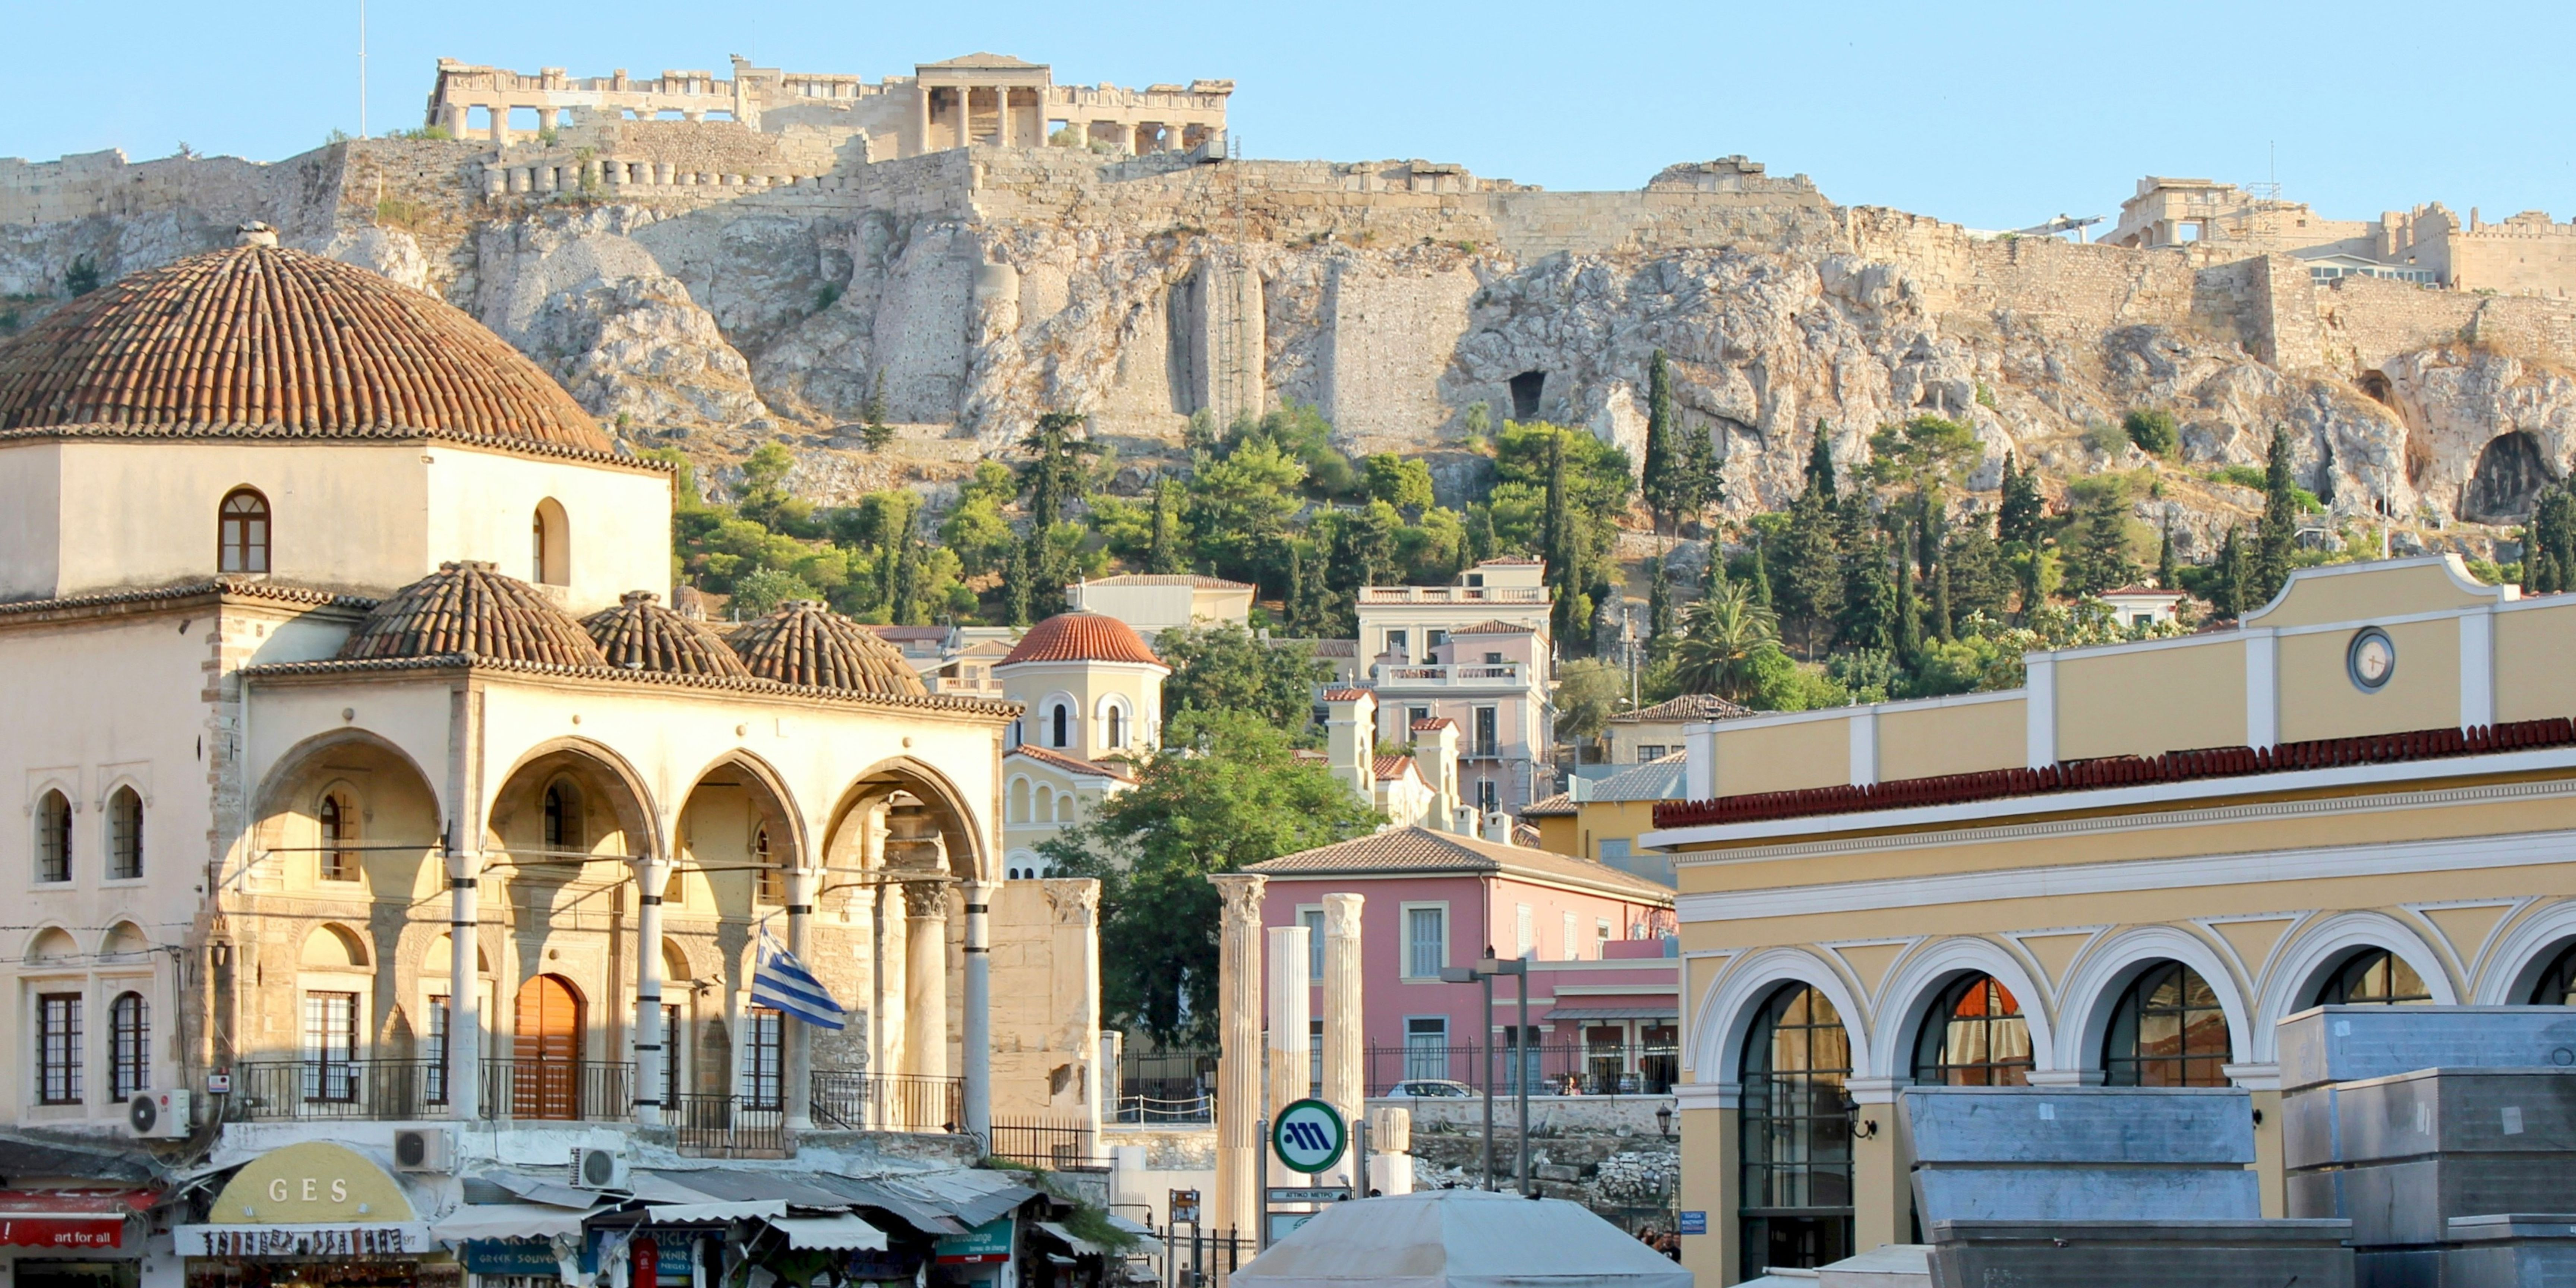 View of Monastiraki Square with the Acropolis in the background.